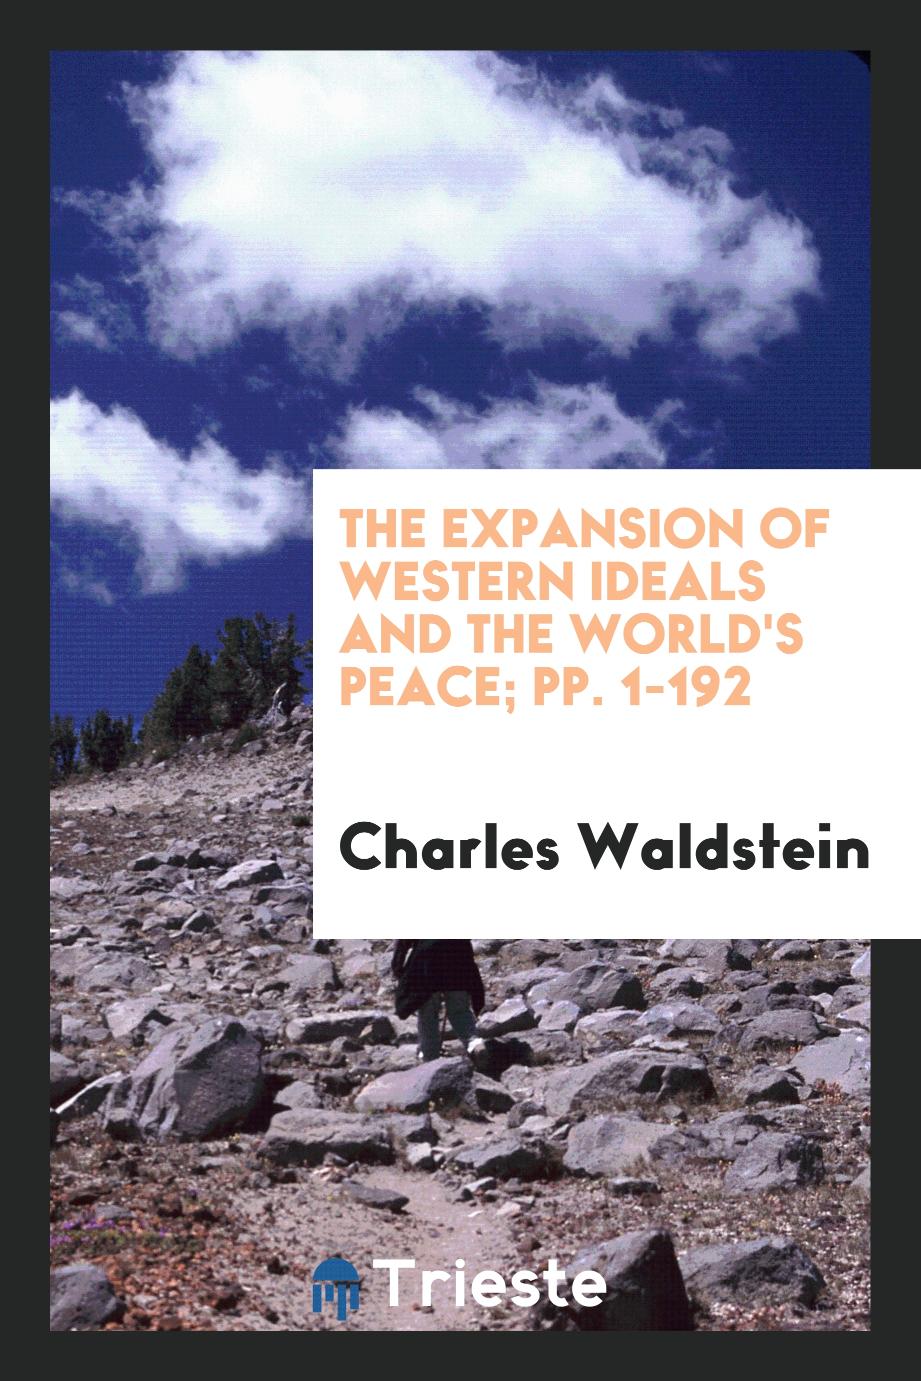 The Expansion of Western Ideals and the World's Peace; pp. 1-192